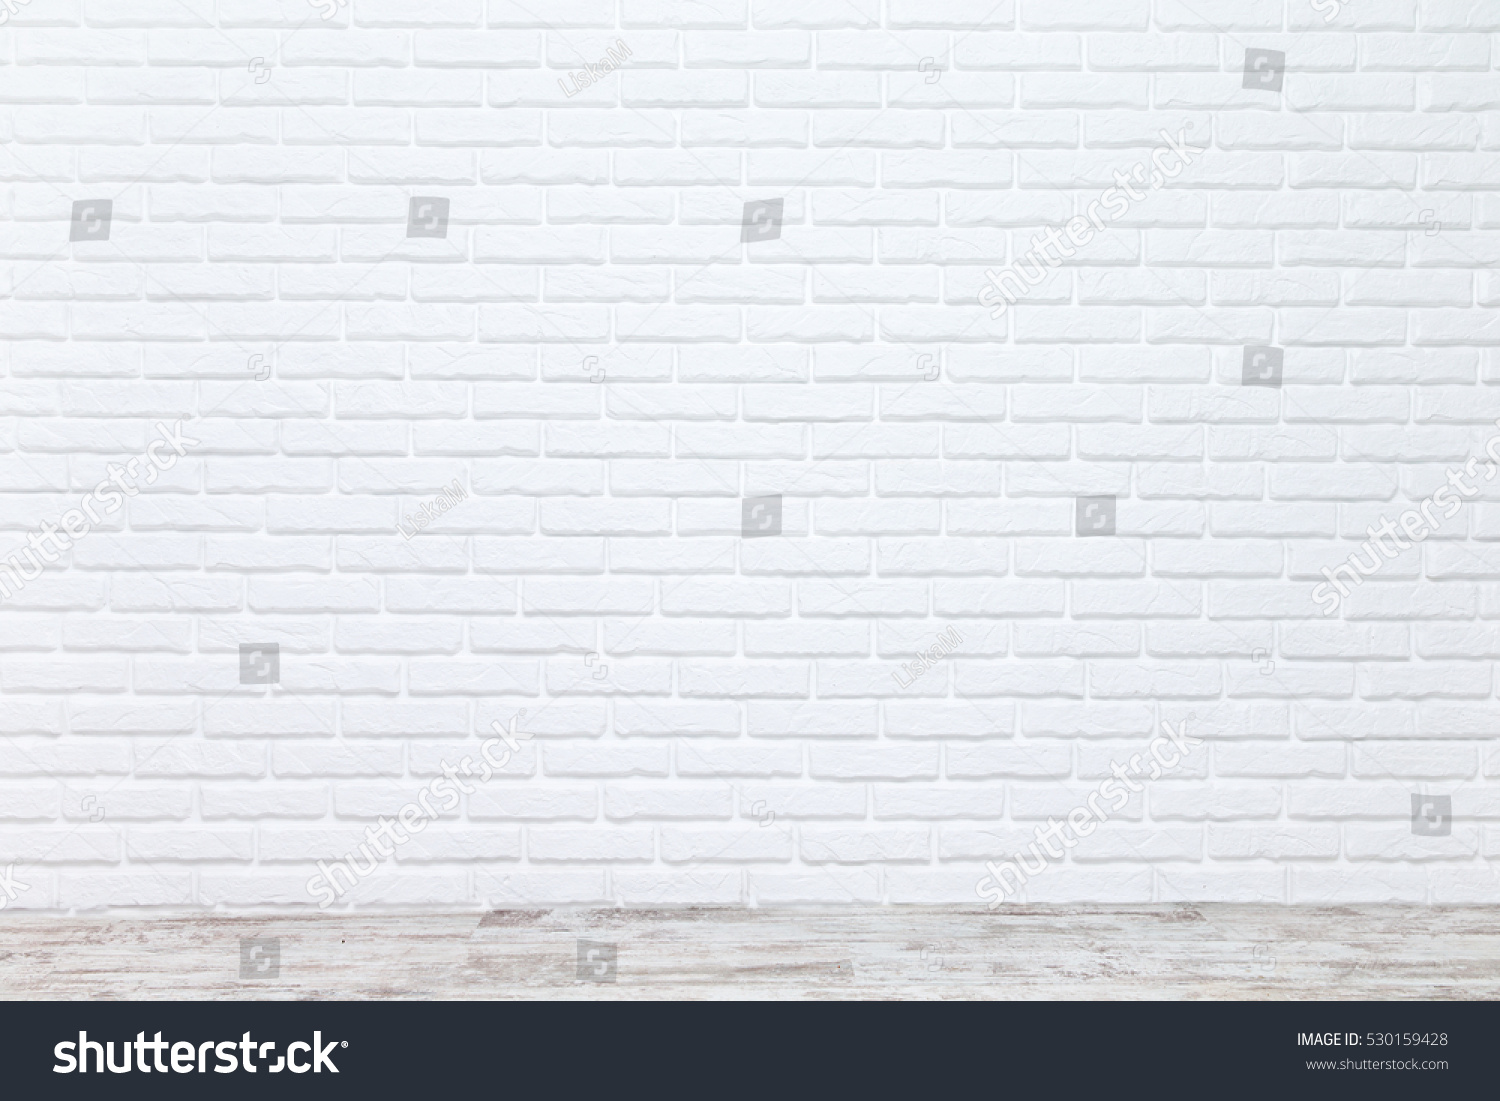 White brick wall for background or texture #530159428